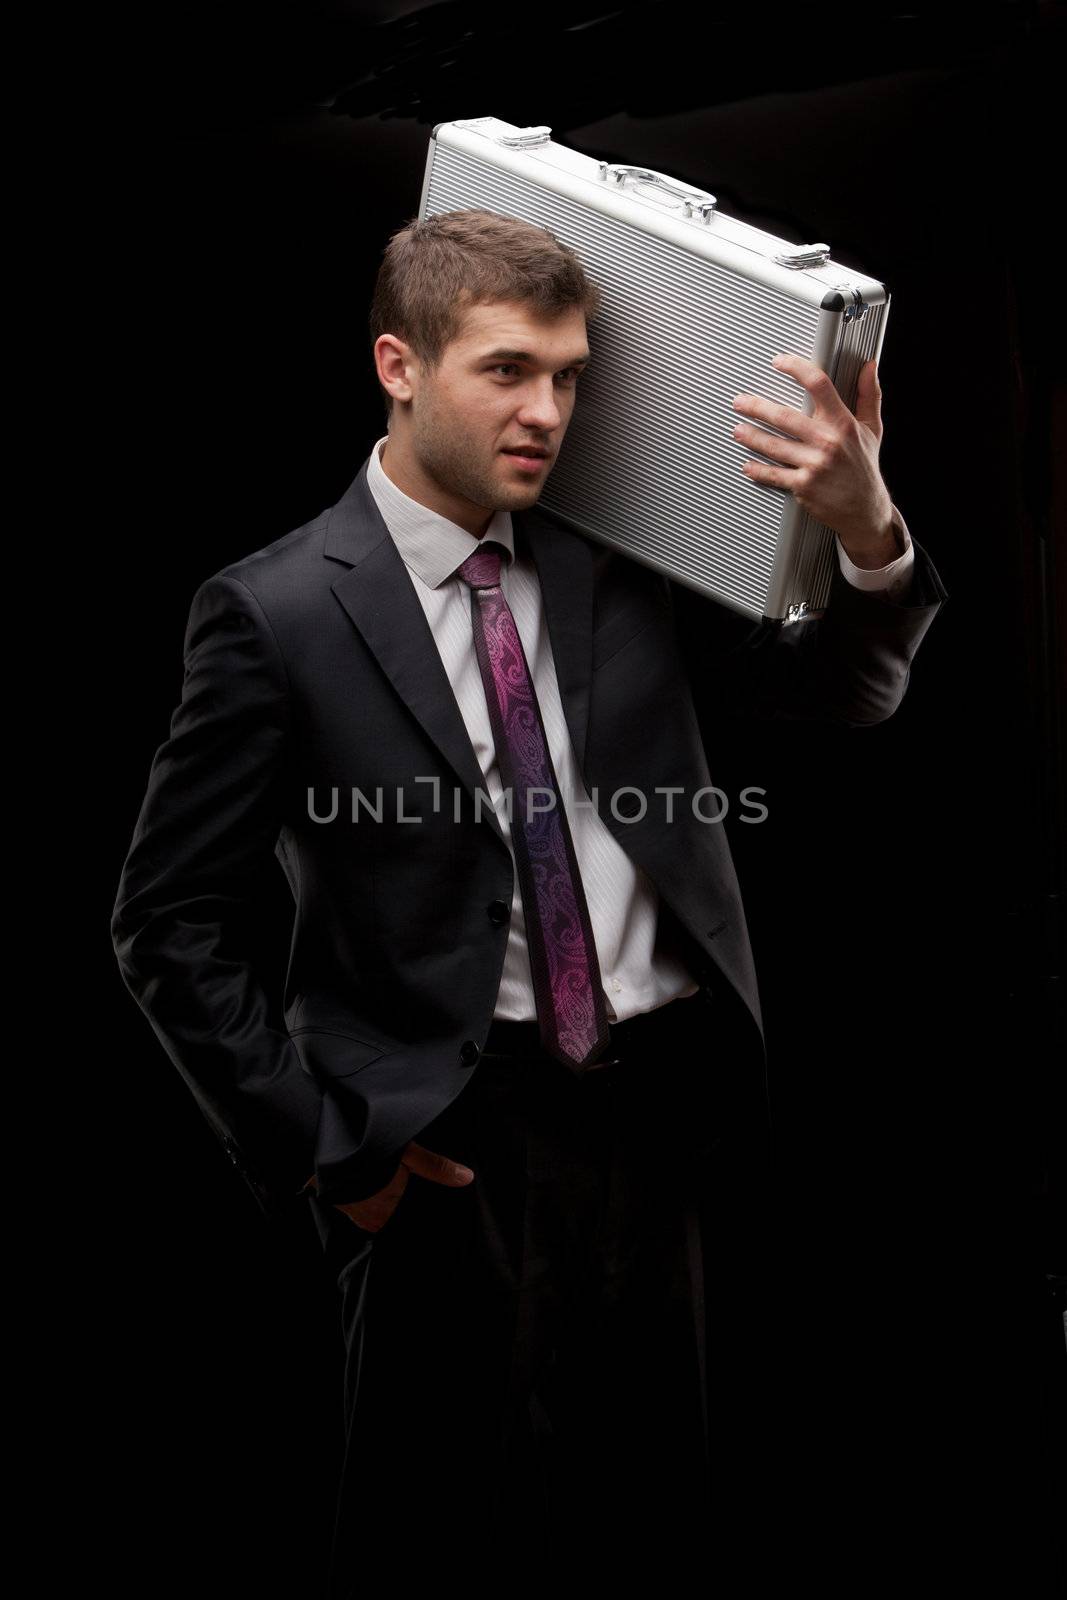 businessman with steel case over black